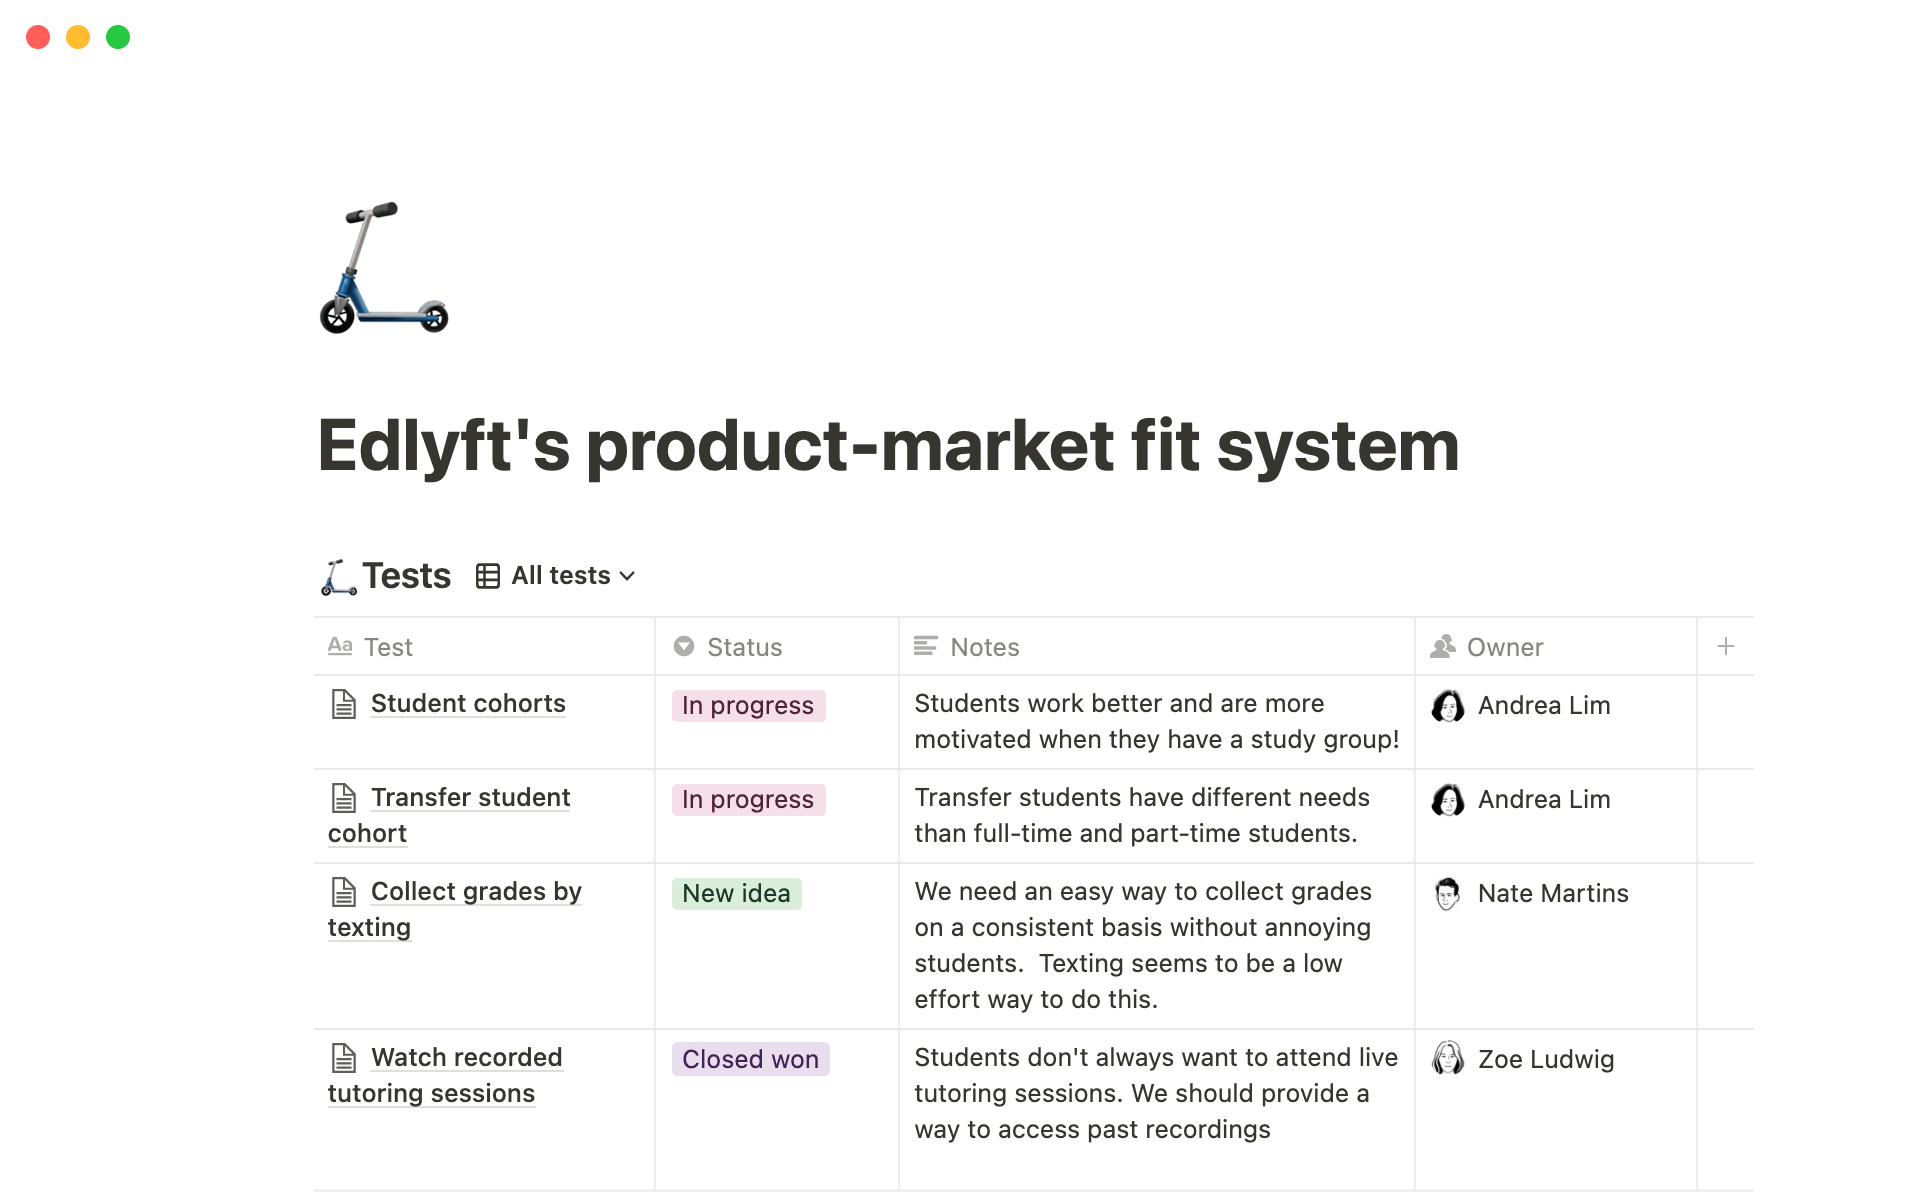 The desktop image for the Edlyft's product-market fit system template